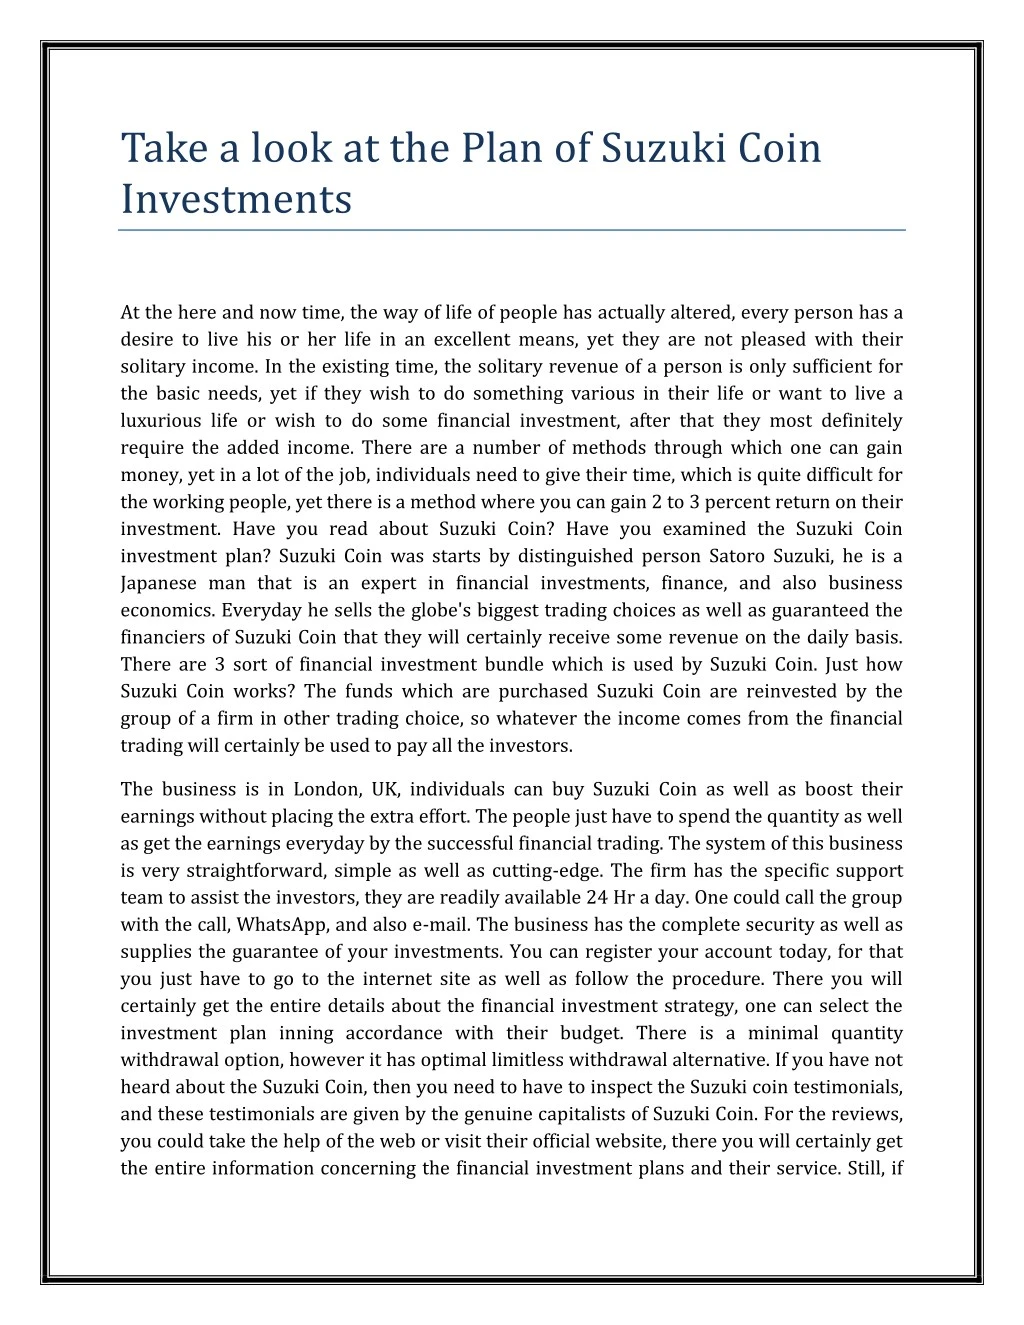 take a look at the plan of suzuki coin investments